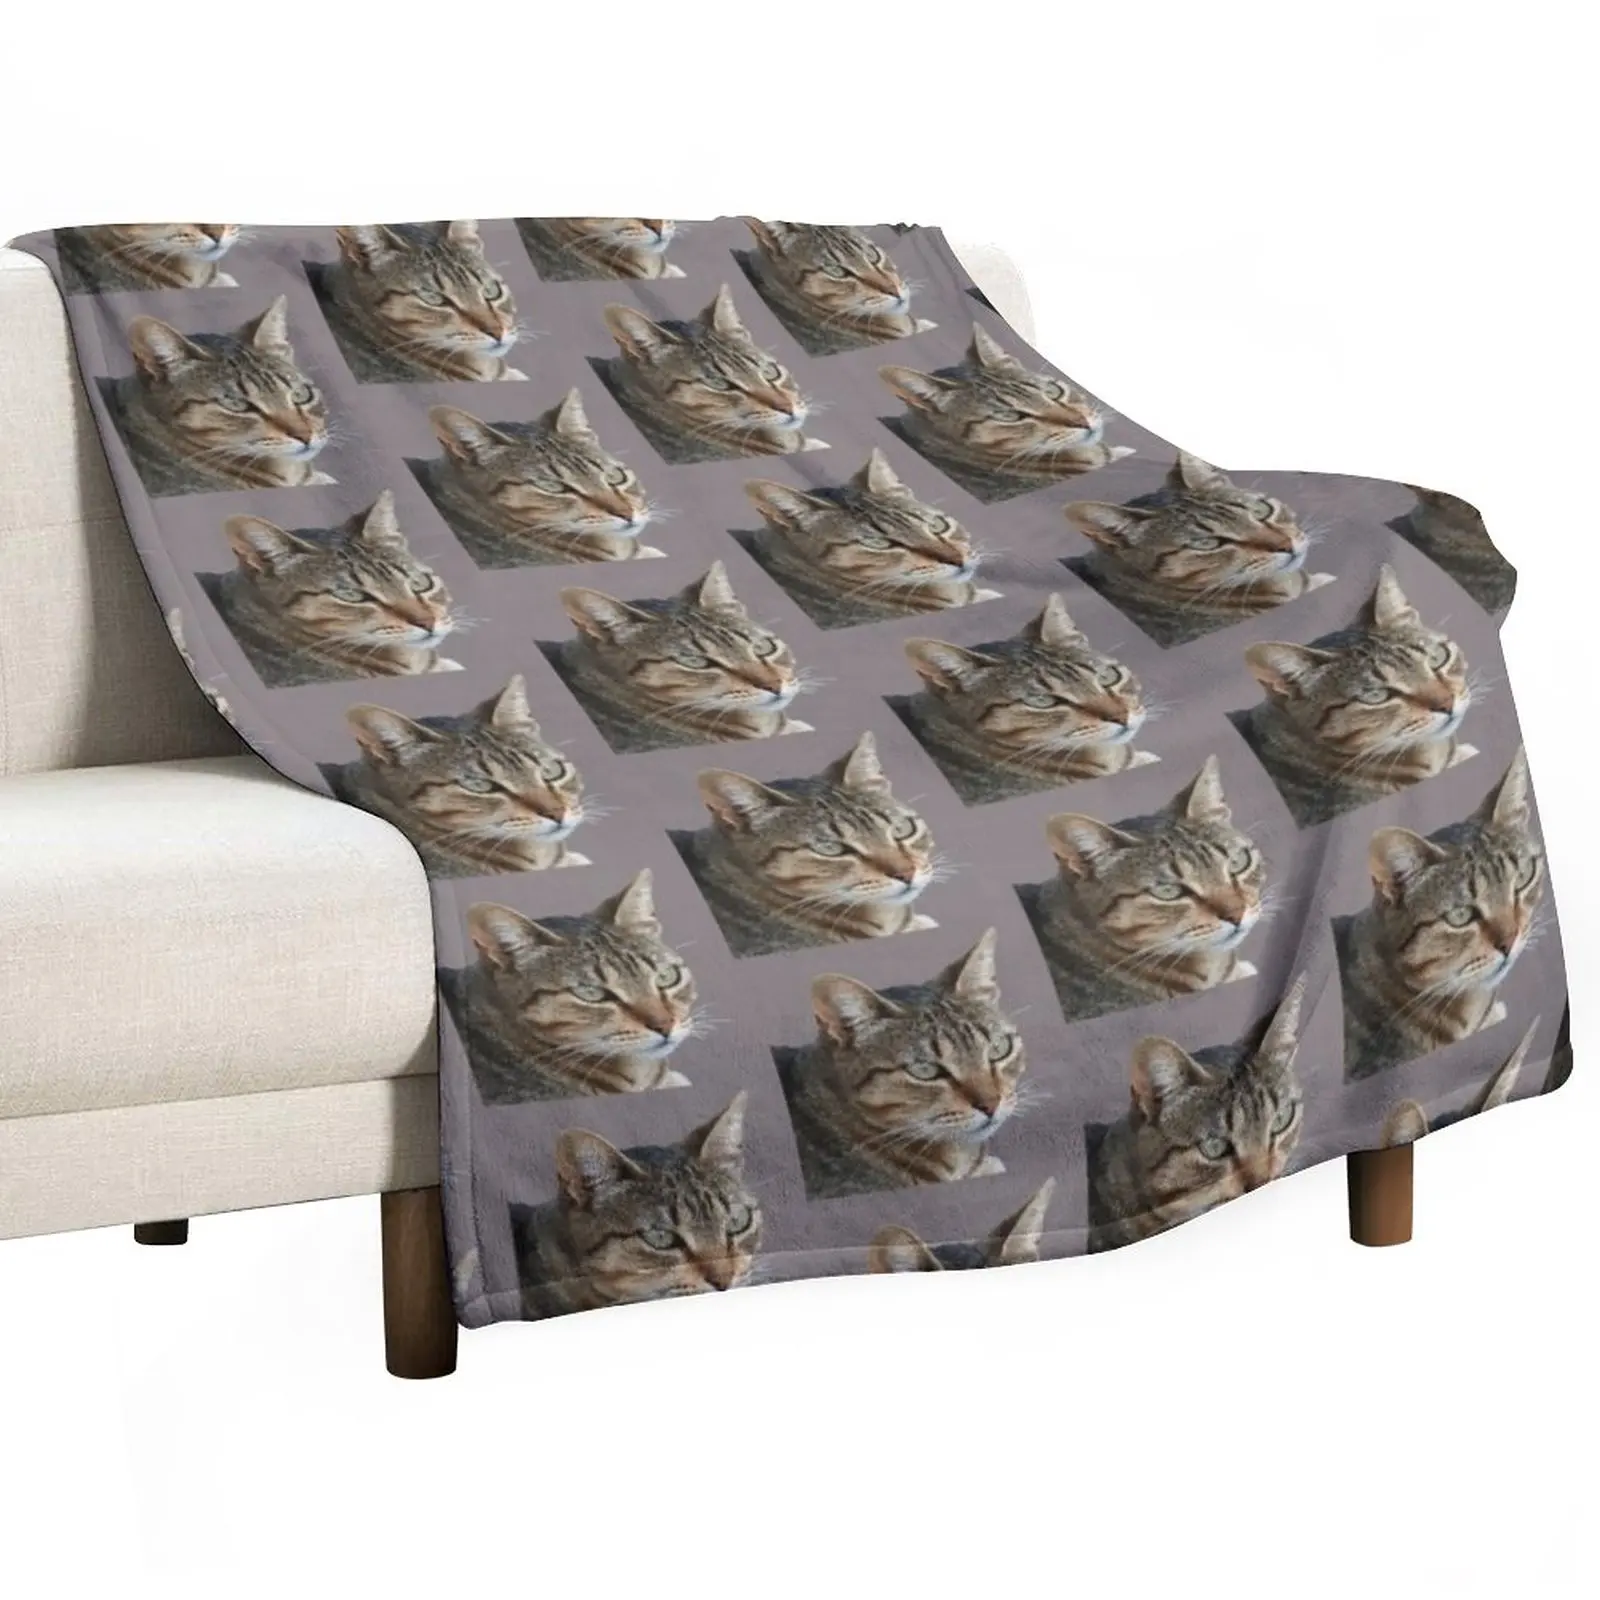 

Stunning Tabby Cat Close Up Portrait Vector Isolated Throw Blanket Soft Big Blanket Moving Blanket Soft Plaid